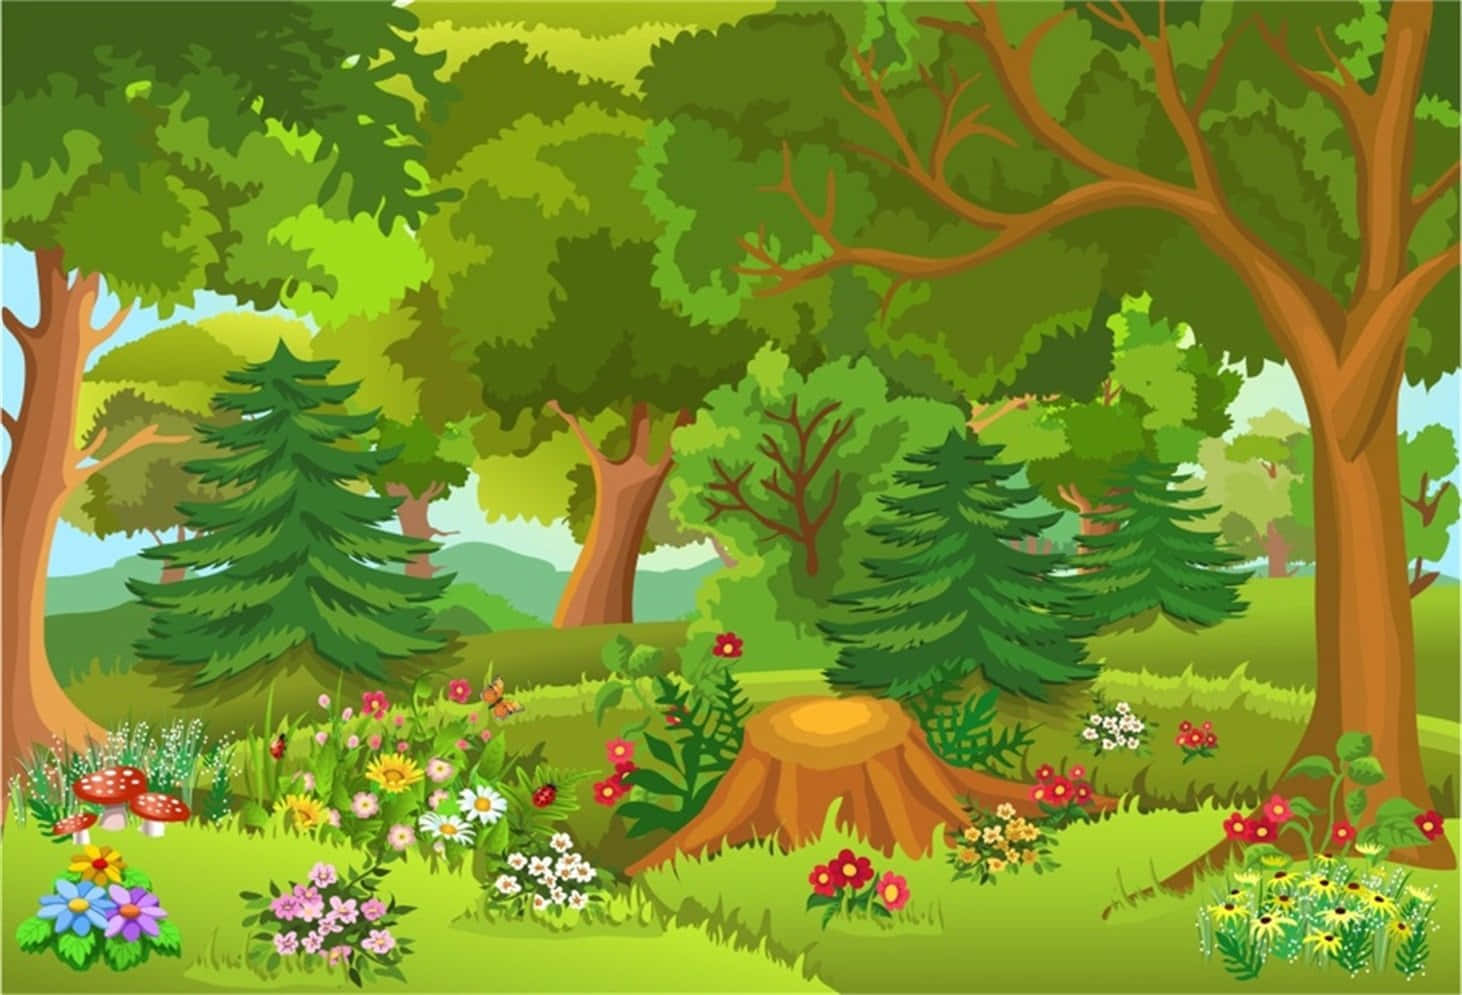 Welcome to Cartoon Forest--a magical world of adventure!